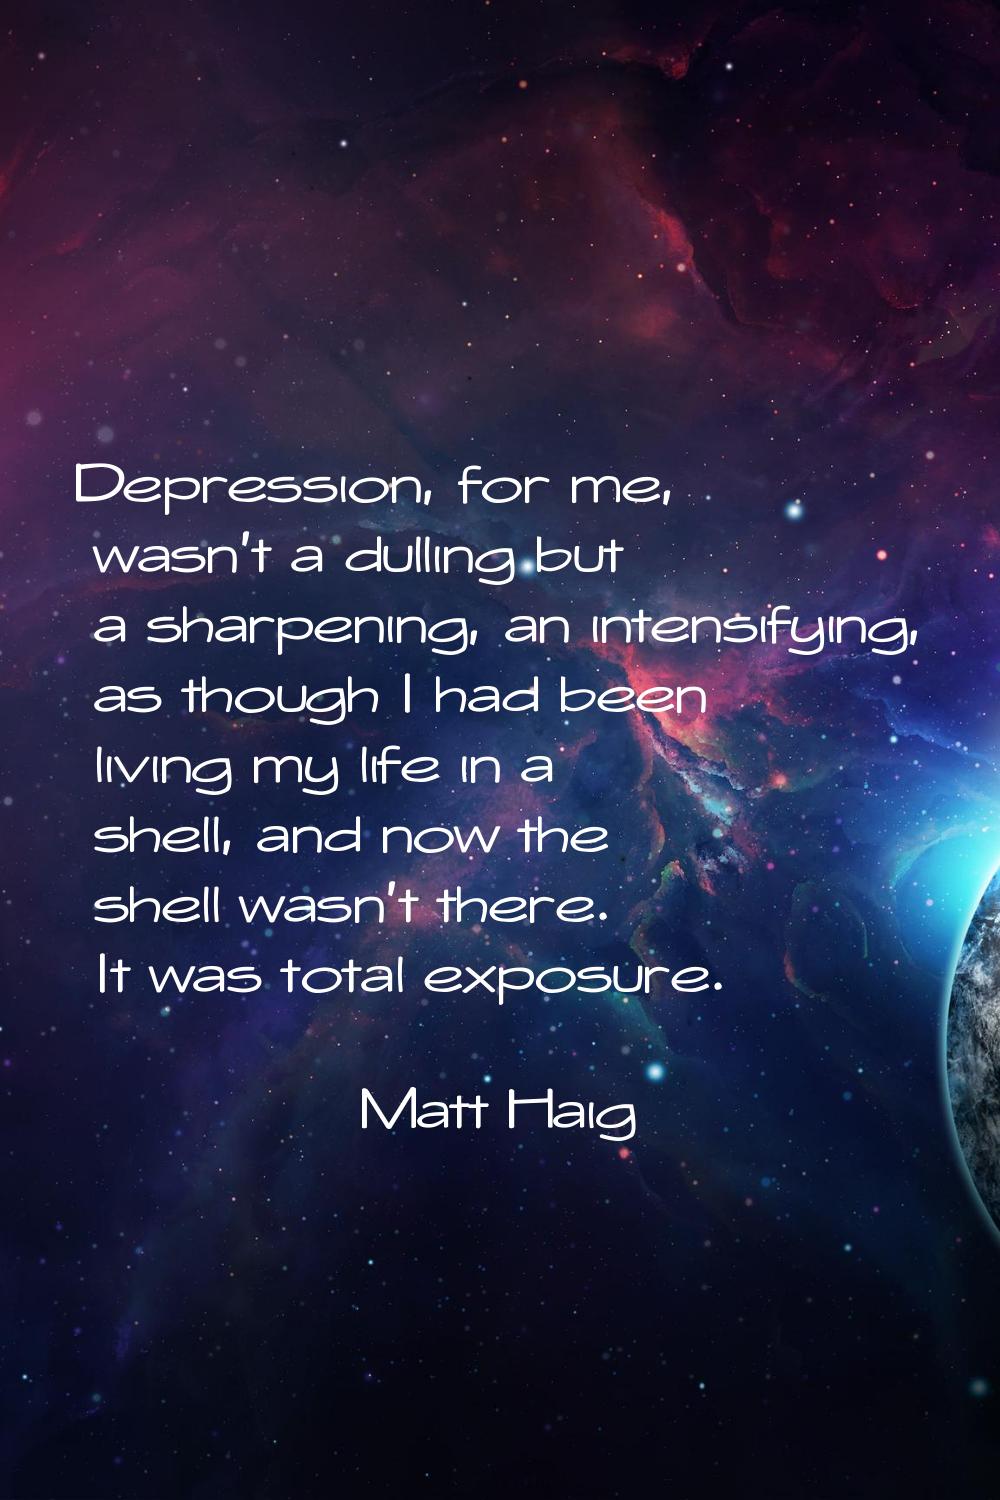 Depression, for me, wasn't a dulling but a sharpening, an intensifying, as though I had been living